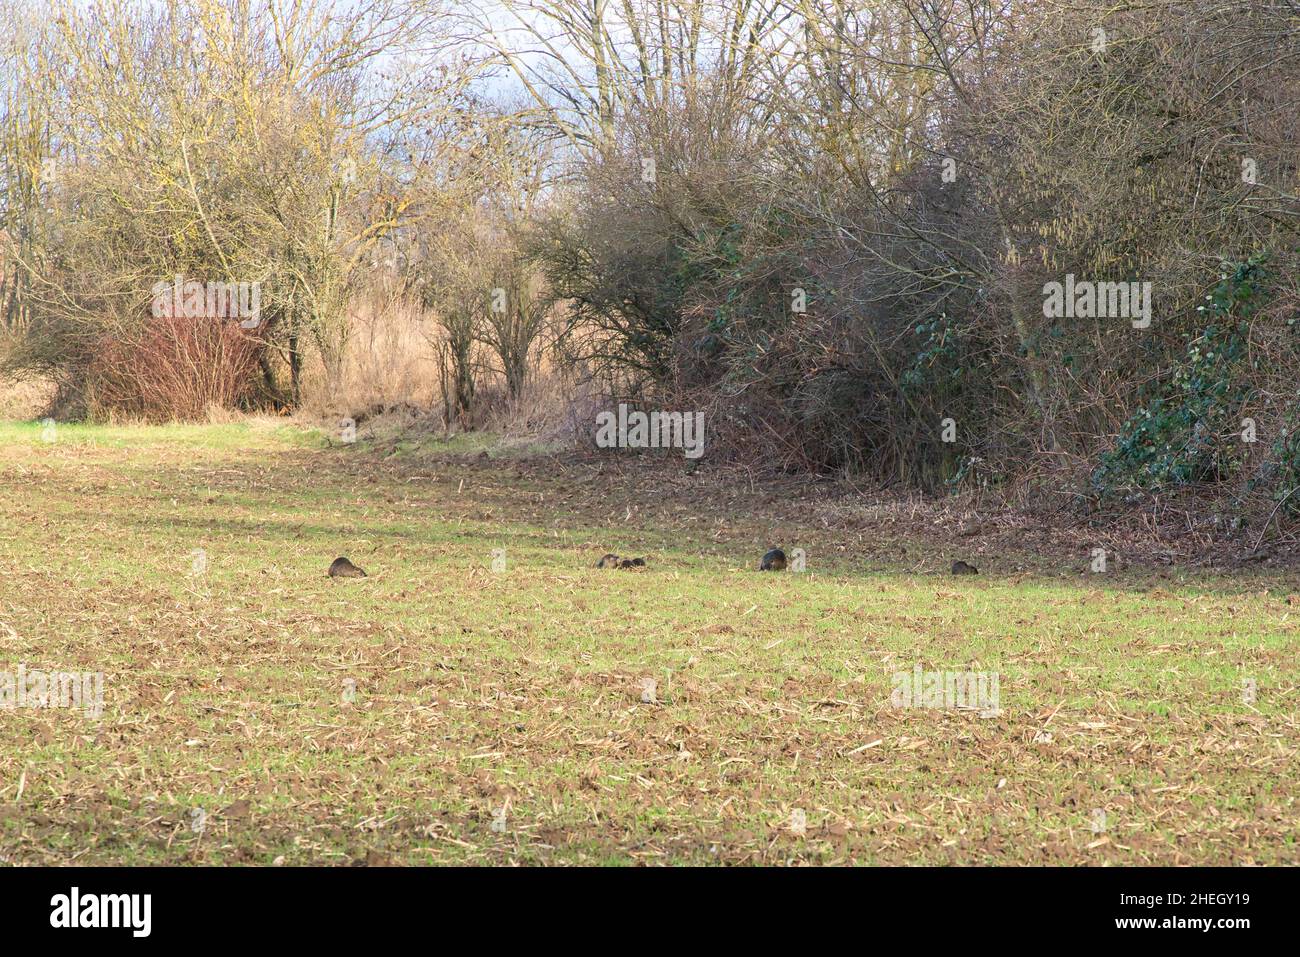 Coypu family with babies resting. Family of many little nutria on a field in winter Stock Photo